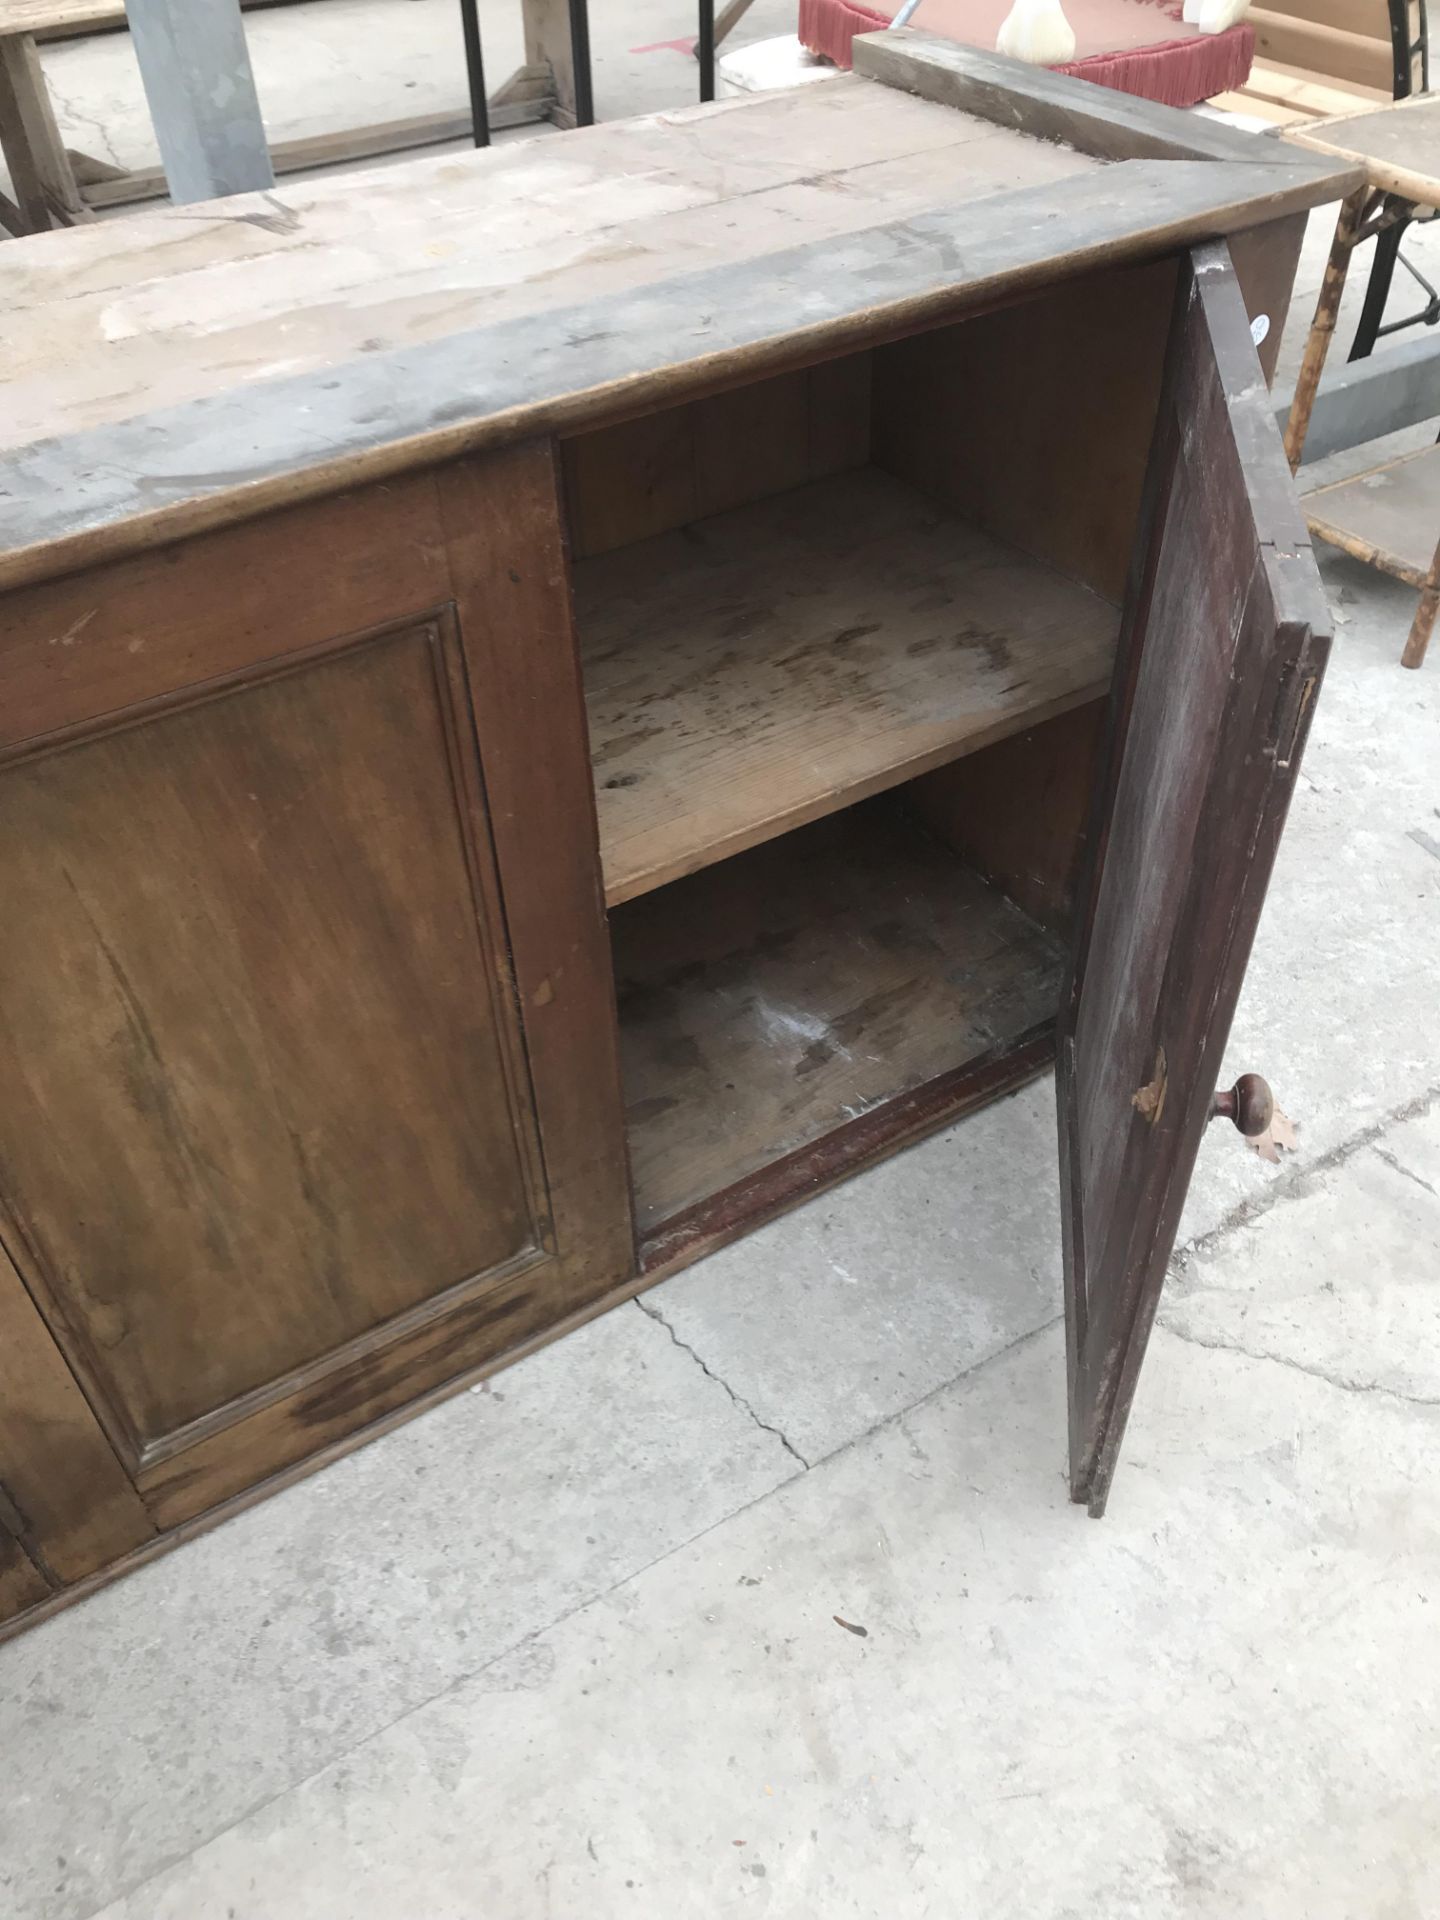 AN OAK CABINET WITH TWO DOORS - Image 2 of 2